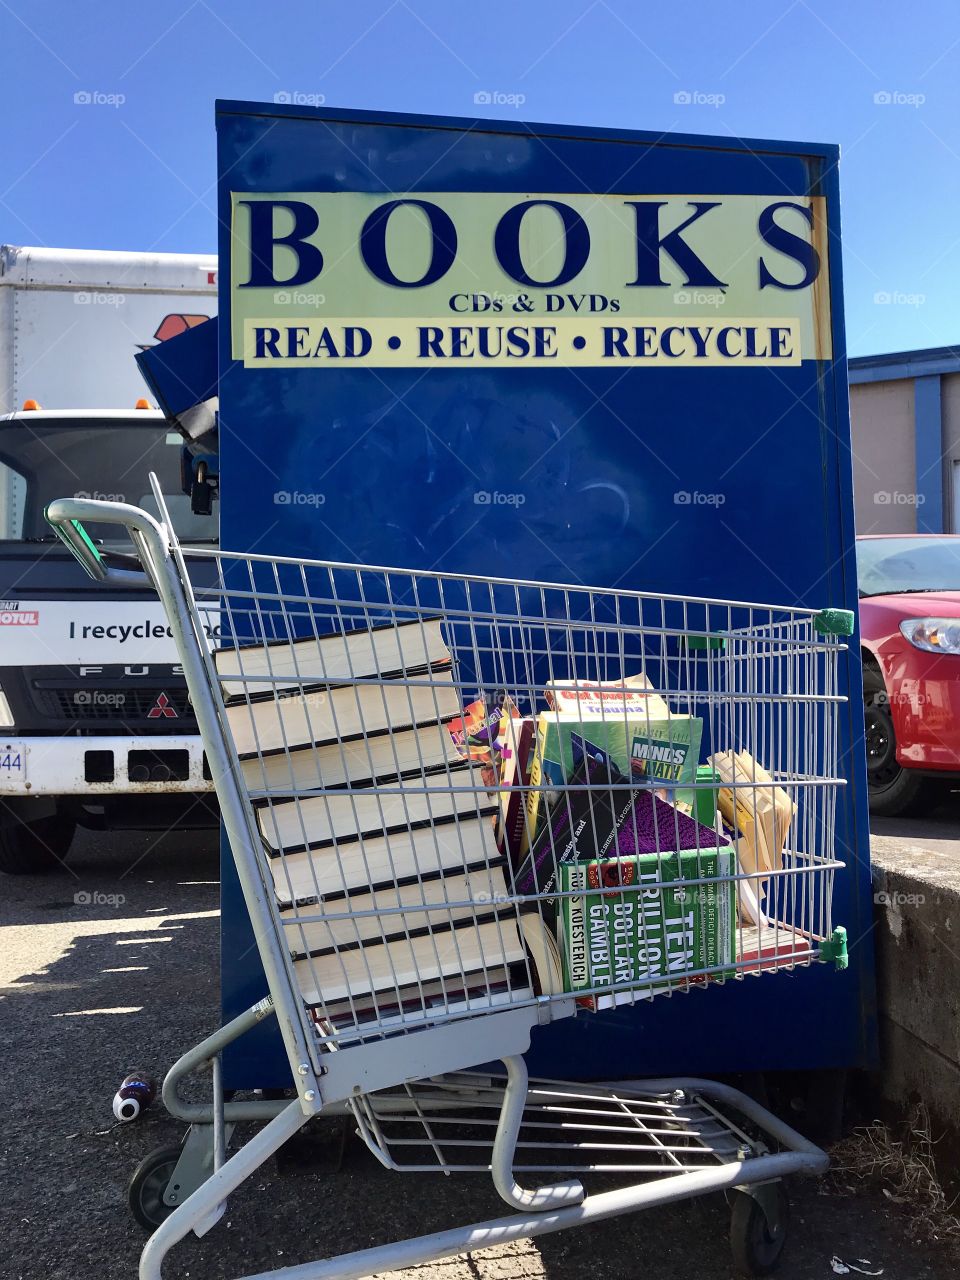 Recycle your books at this depot 